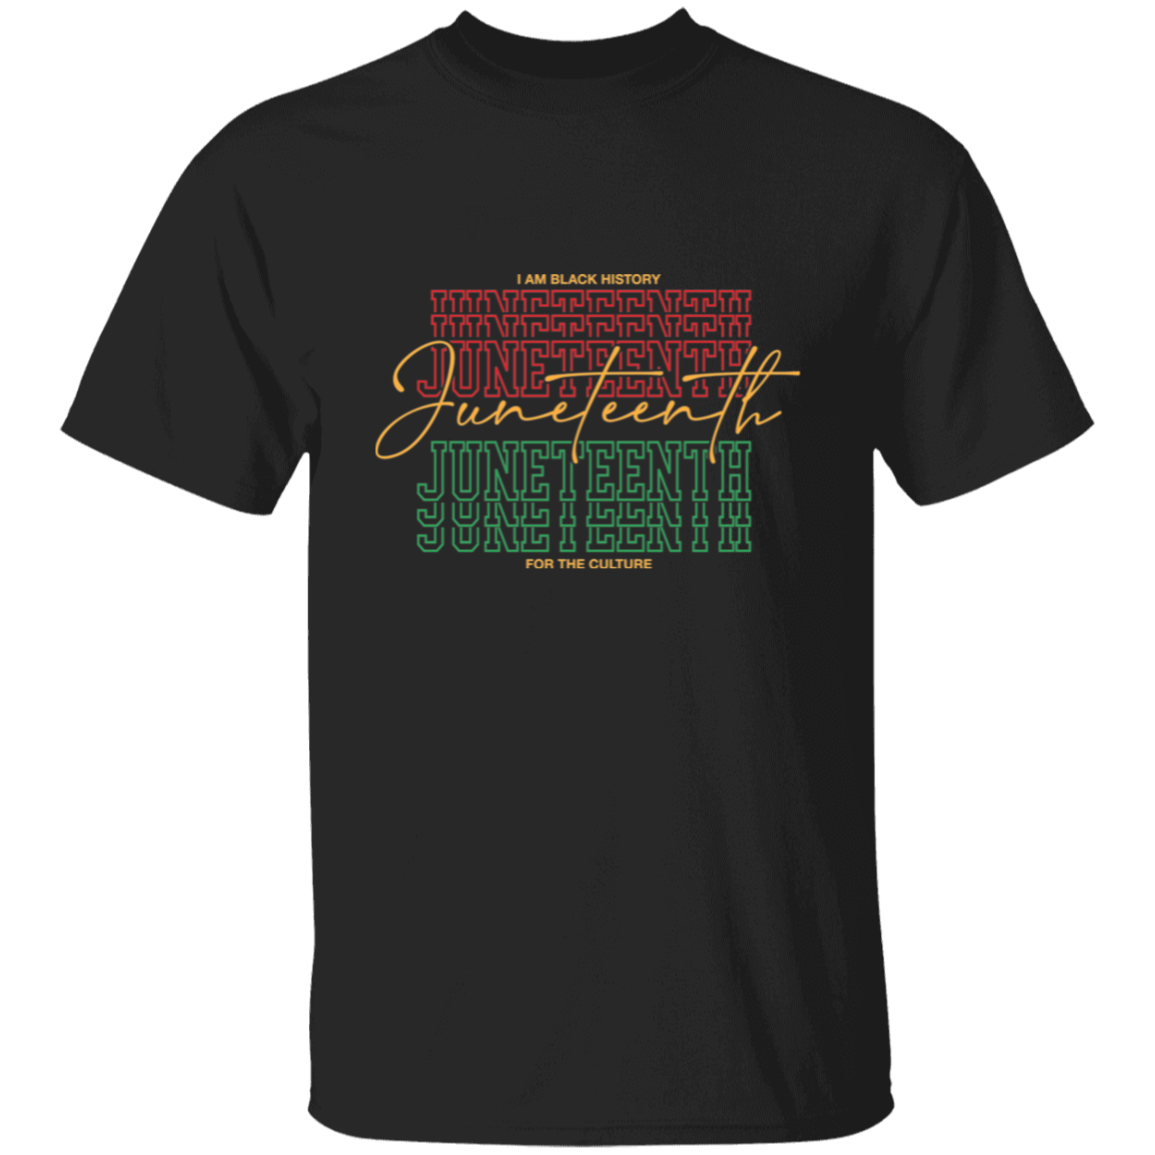 I AM BLACK HISTORY | JUNETEENTH COLLECTION